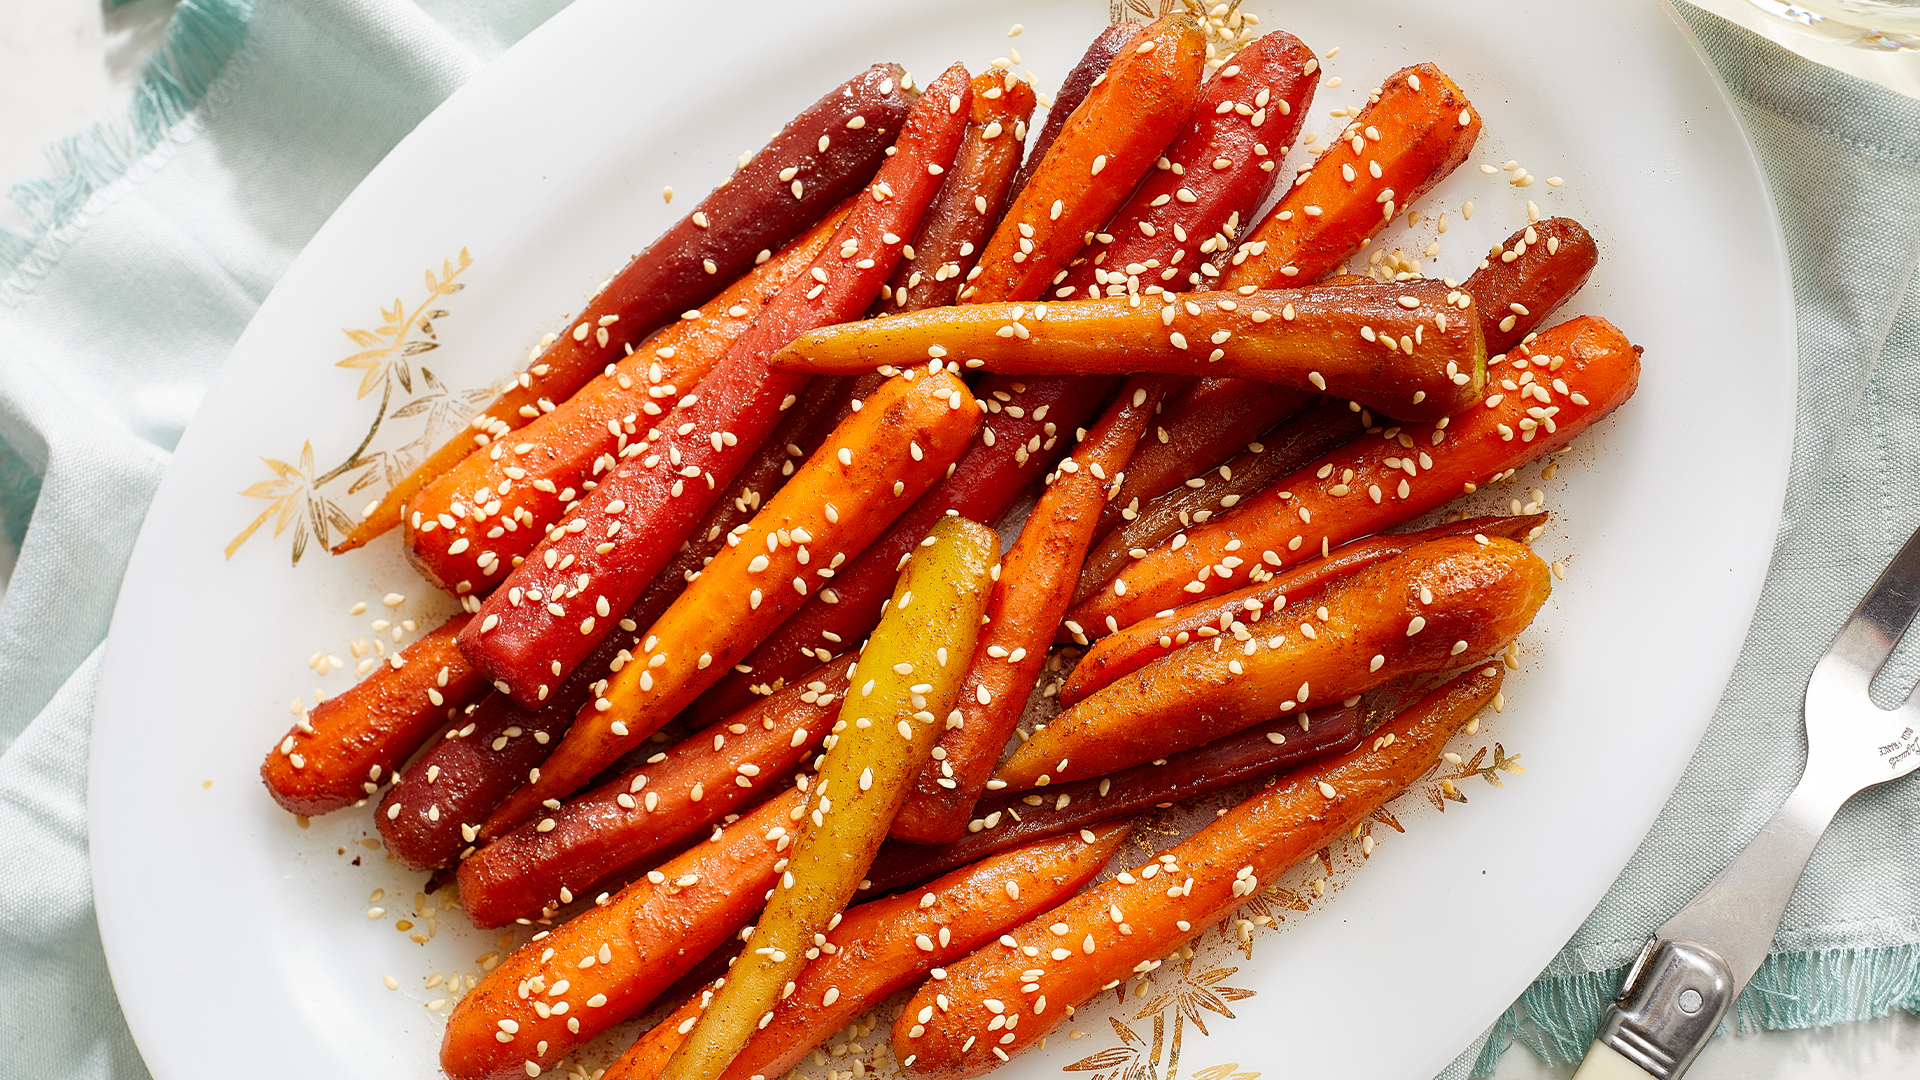 Sweet and savoury carrots